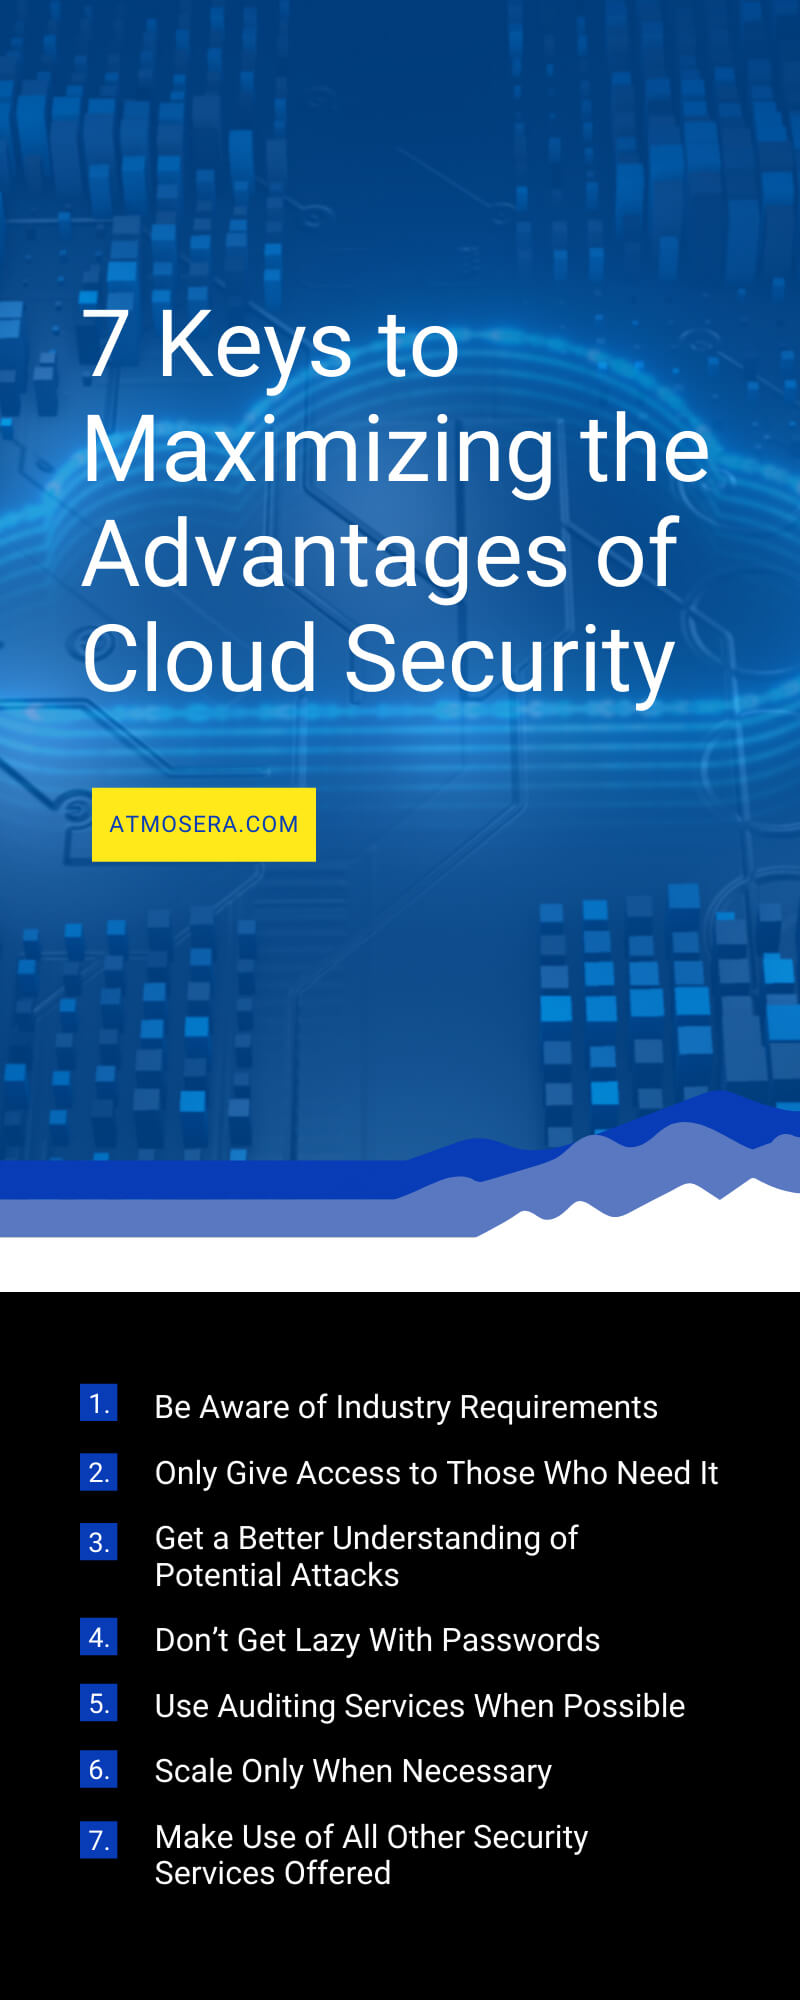 7 Keys to Maximizing the Advantages of Cloud Security